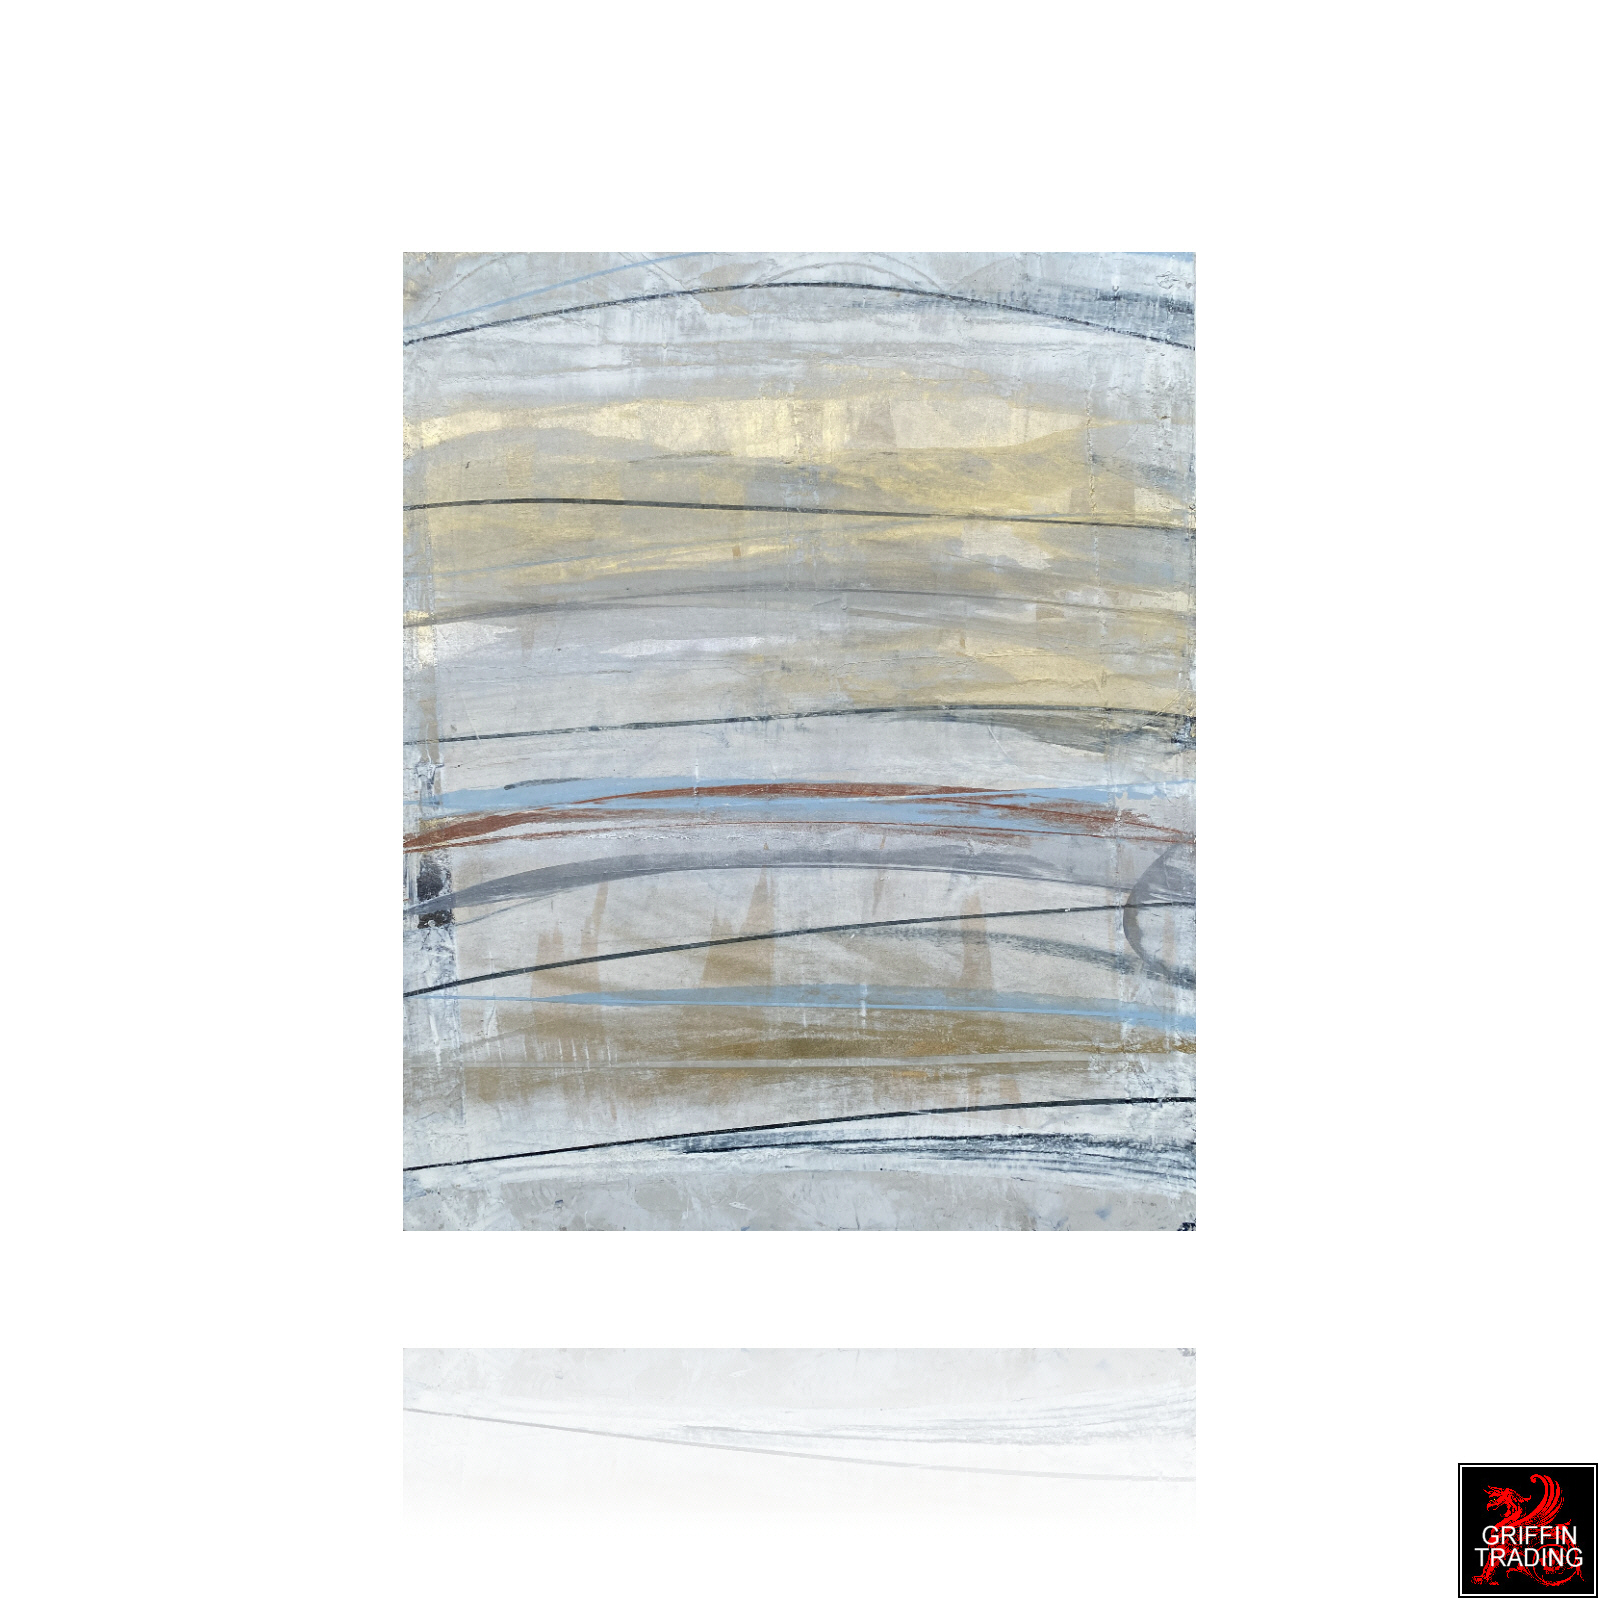 Mixed media abstract painting 8707 by Austin Allen James.